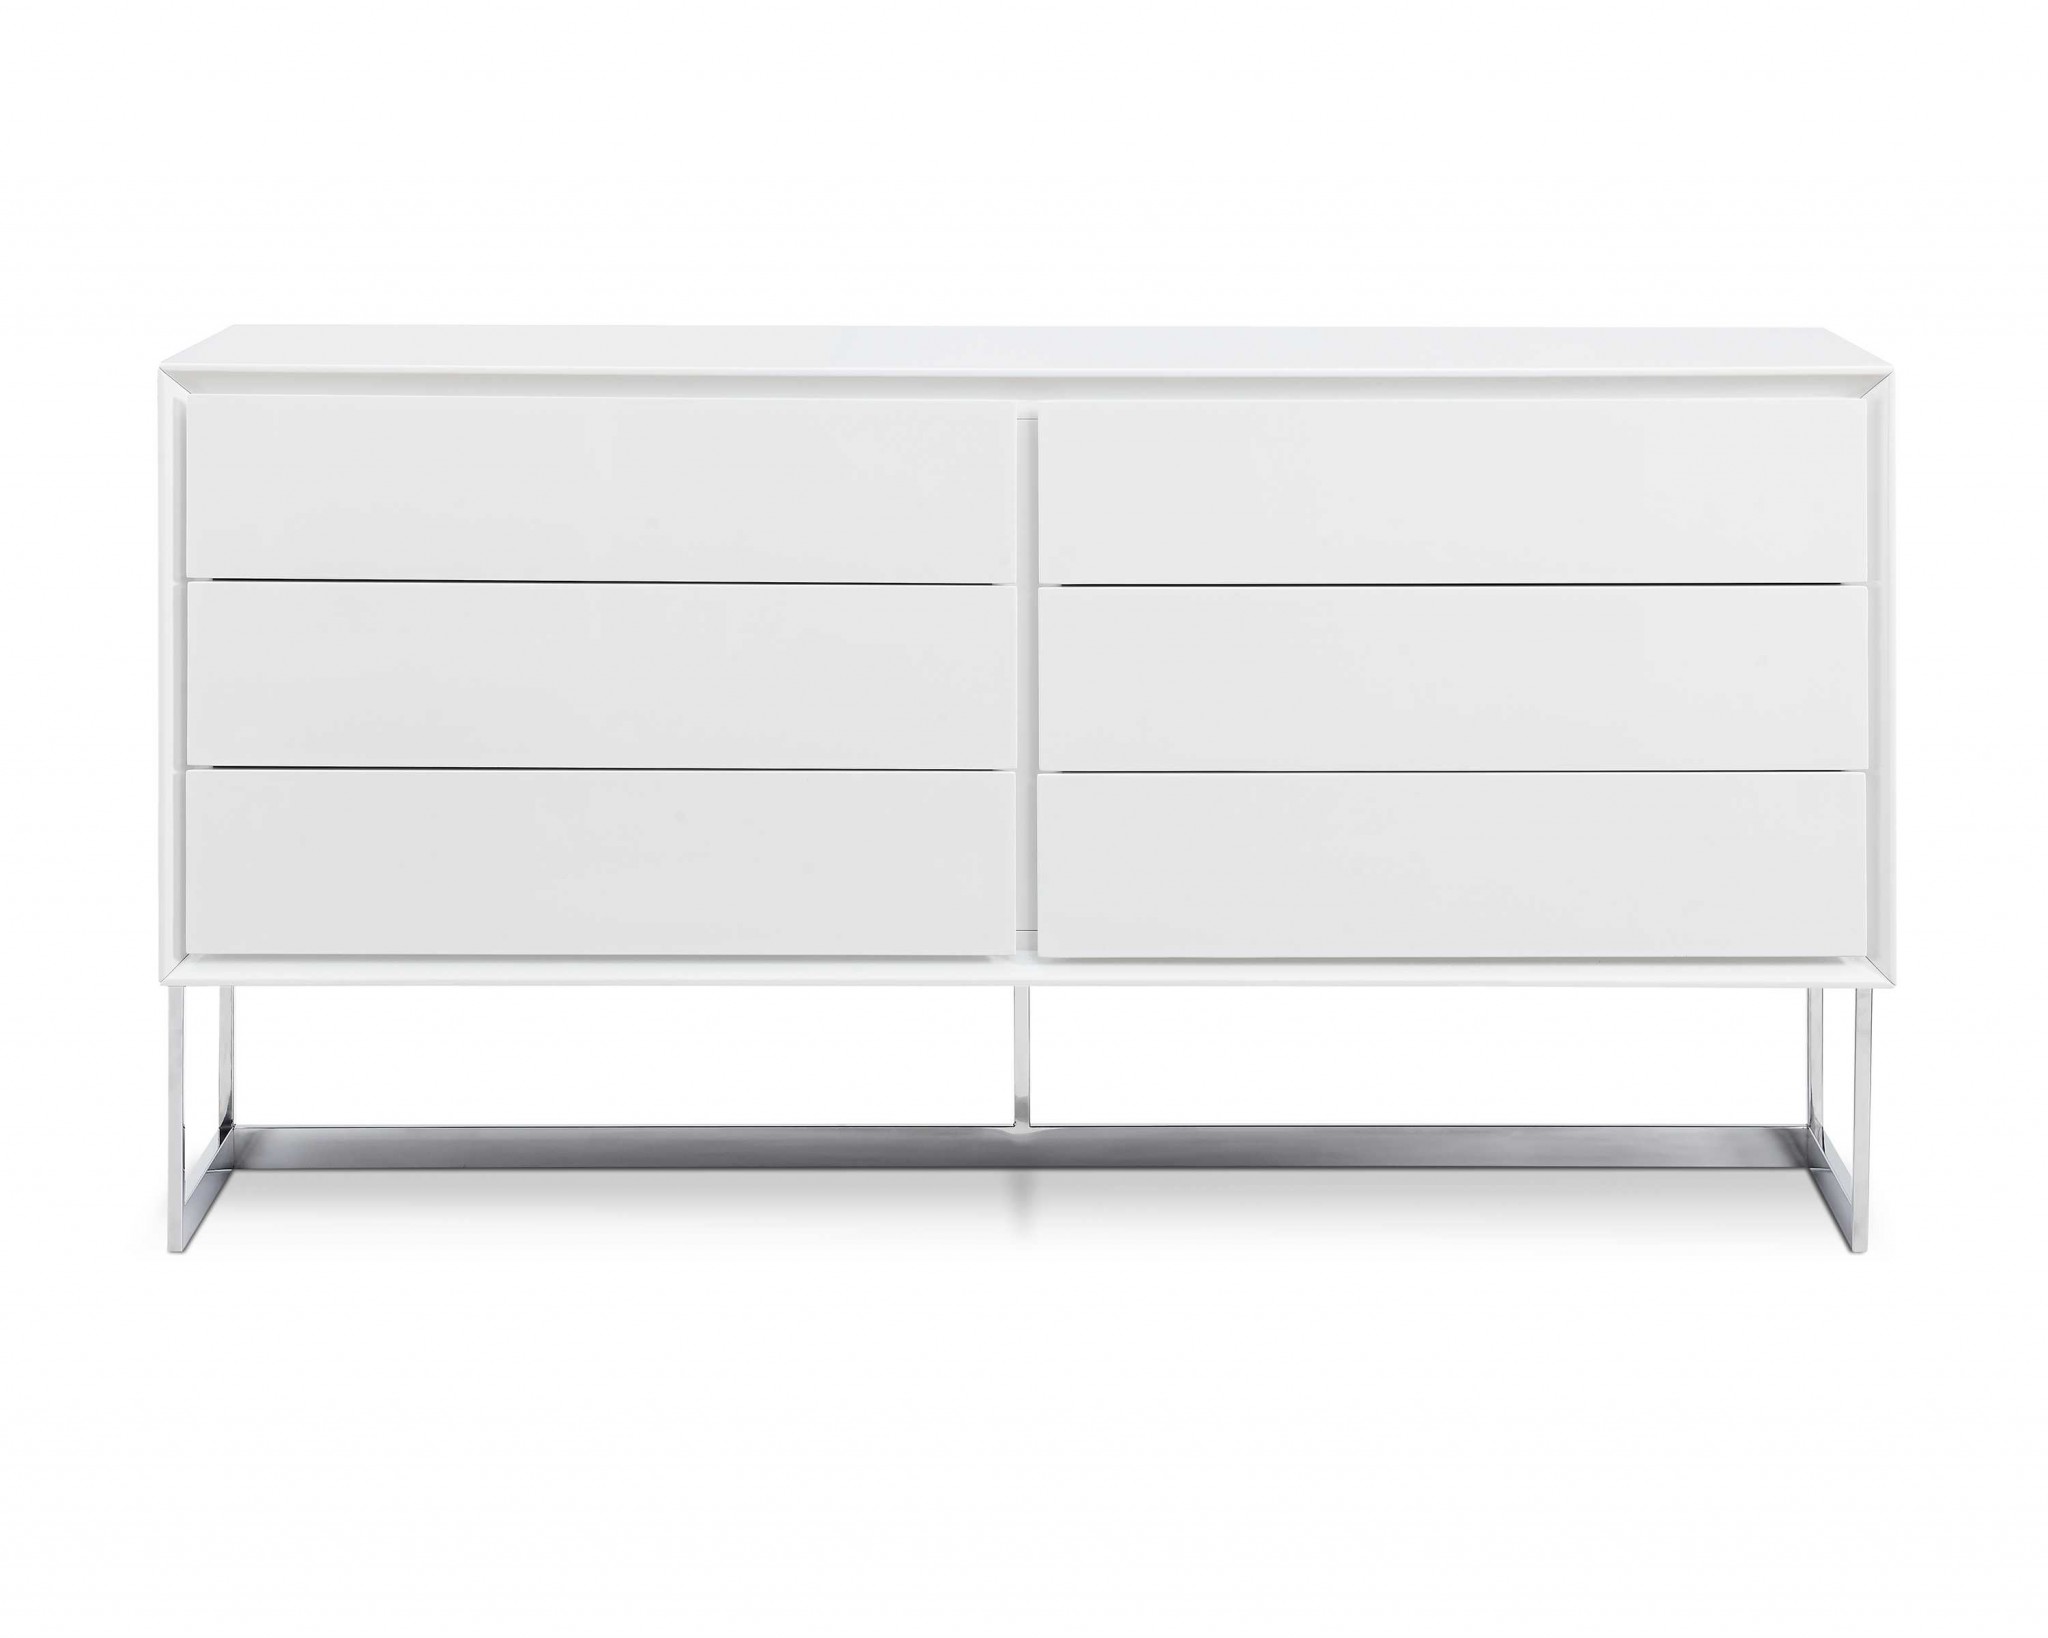 60" X 20" X 32" White Stainless Steel Buffet